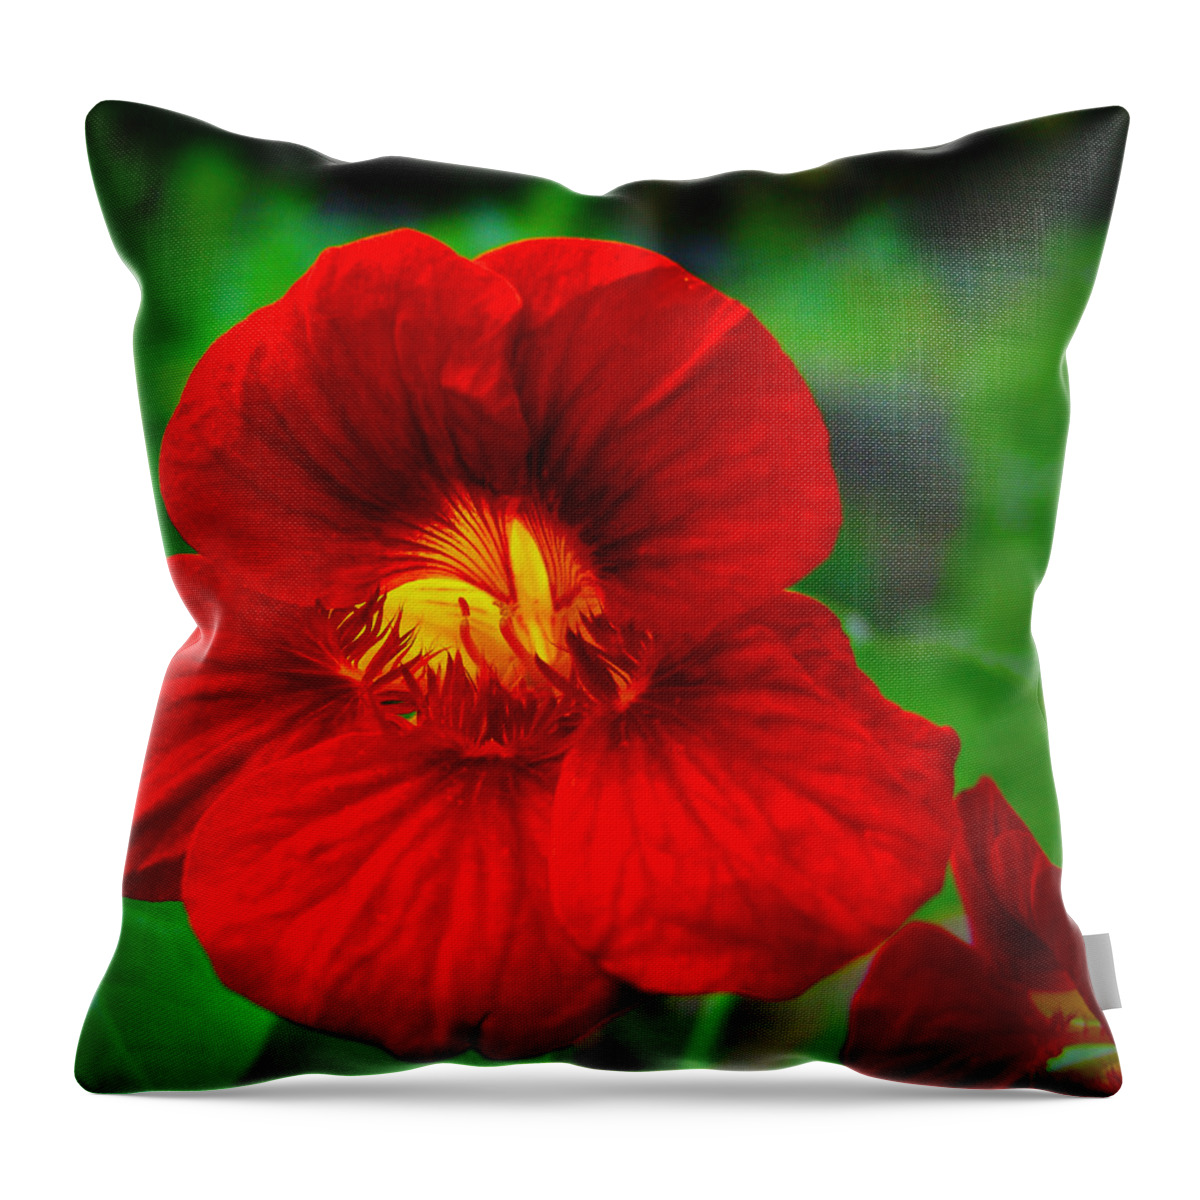 Day Lily Throw Pillow featuring the photograph Day Lily by Bill Barber